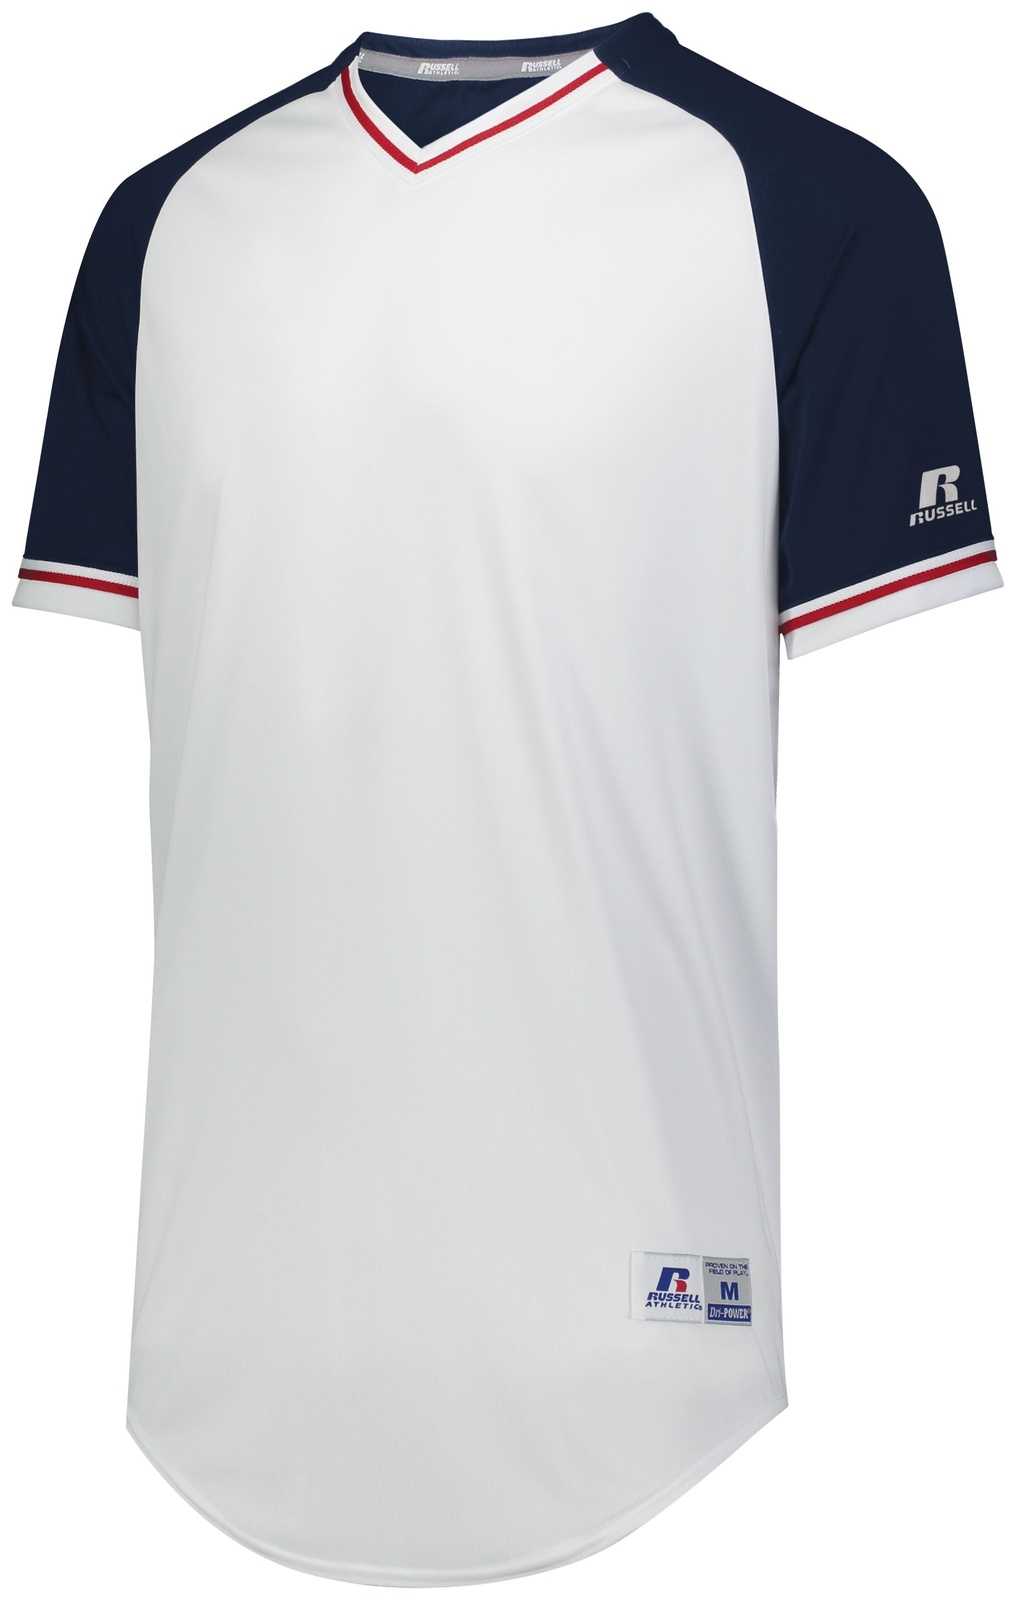 Russell R01X3M Classic V-Neck Jersey - White Navy True Red - HIT a Double